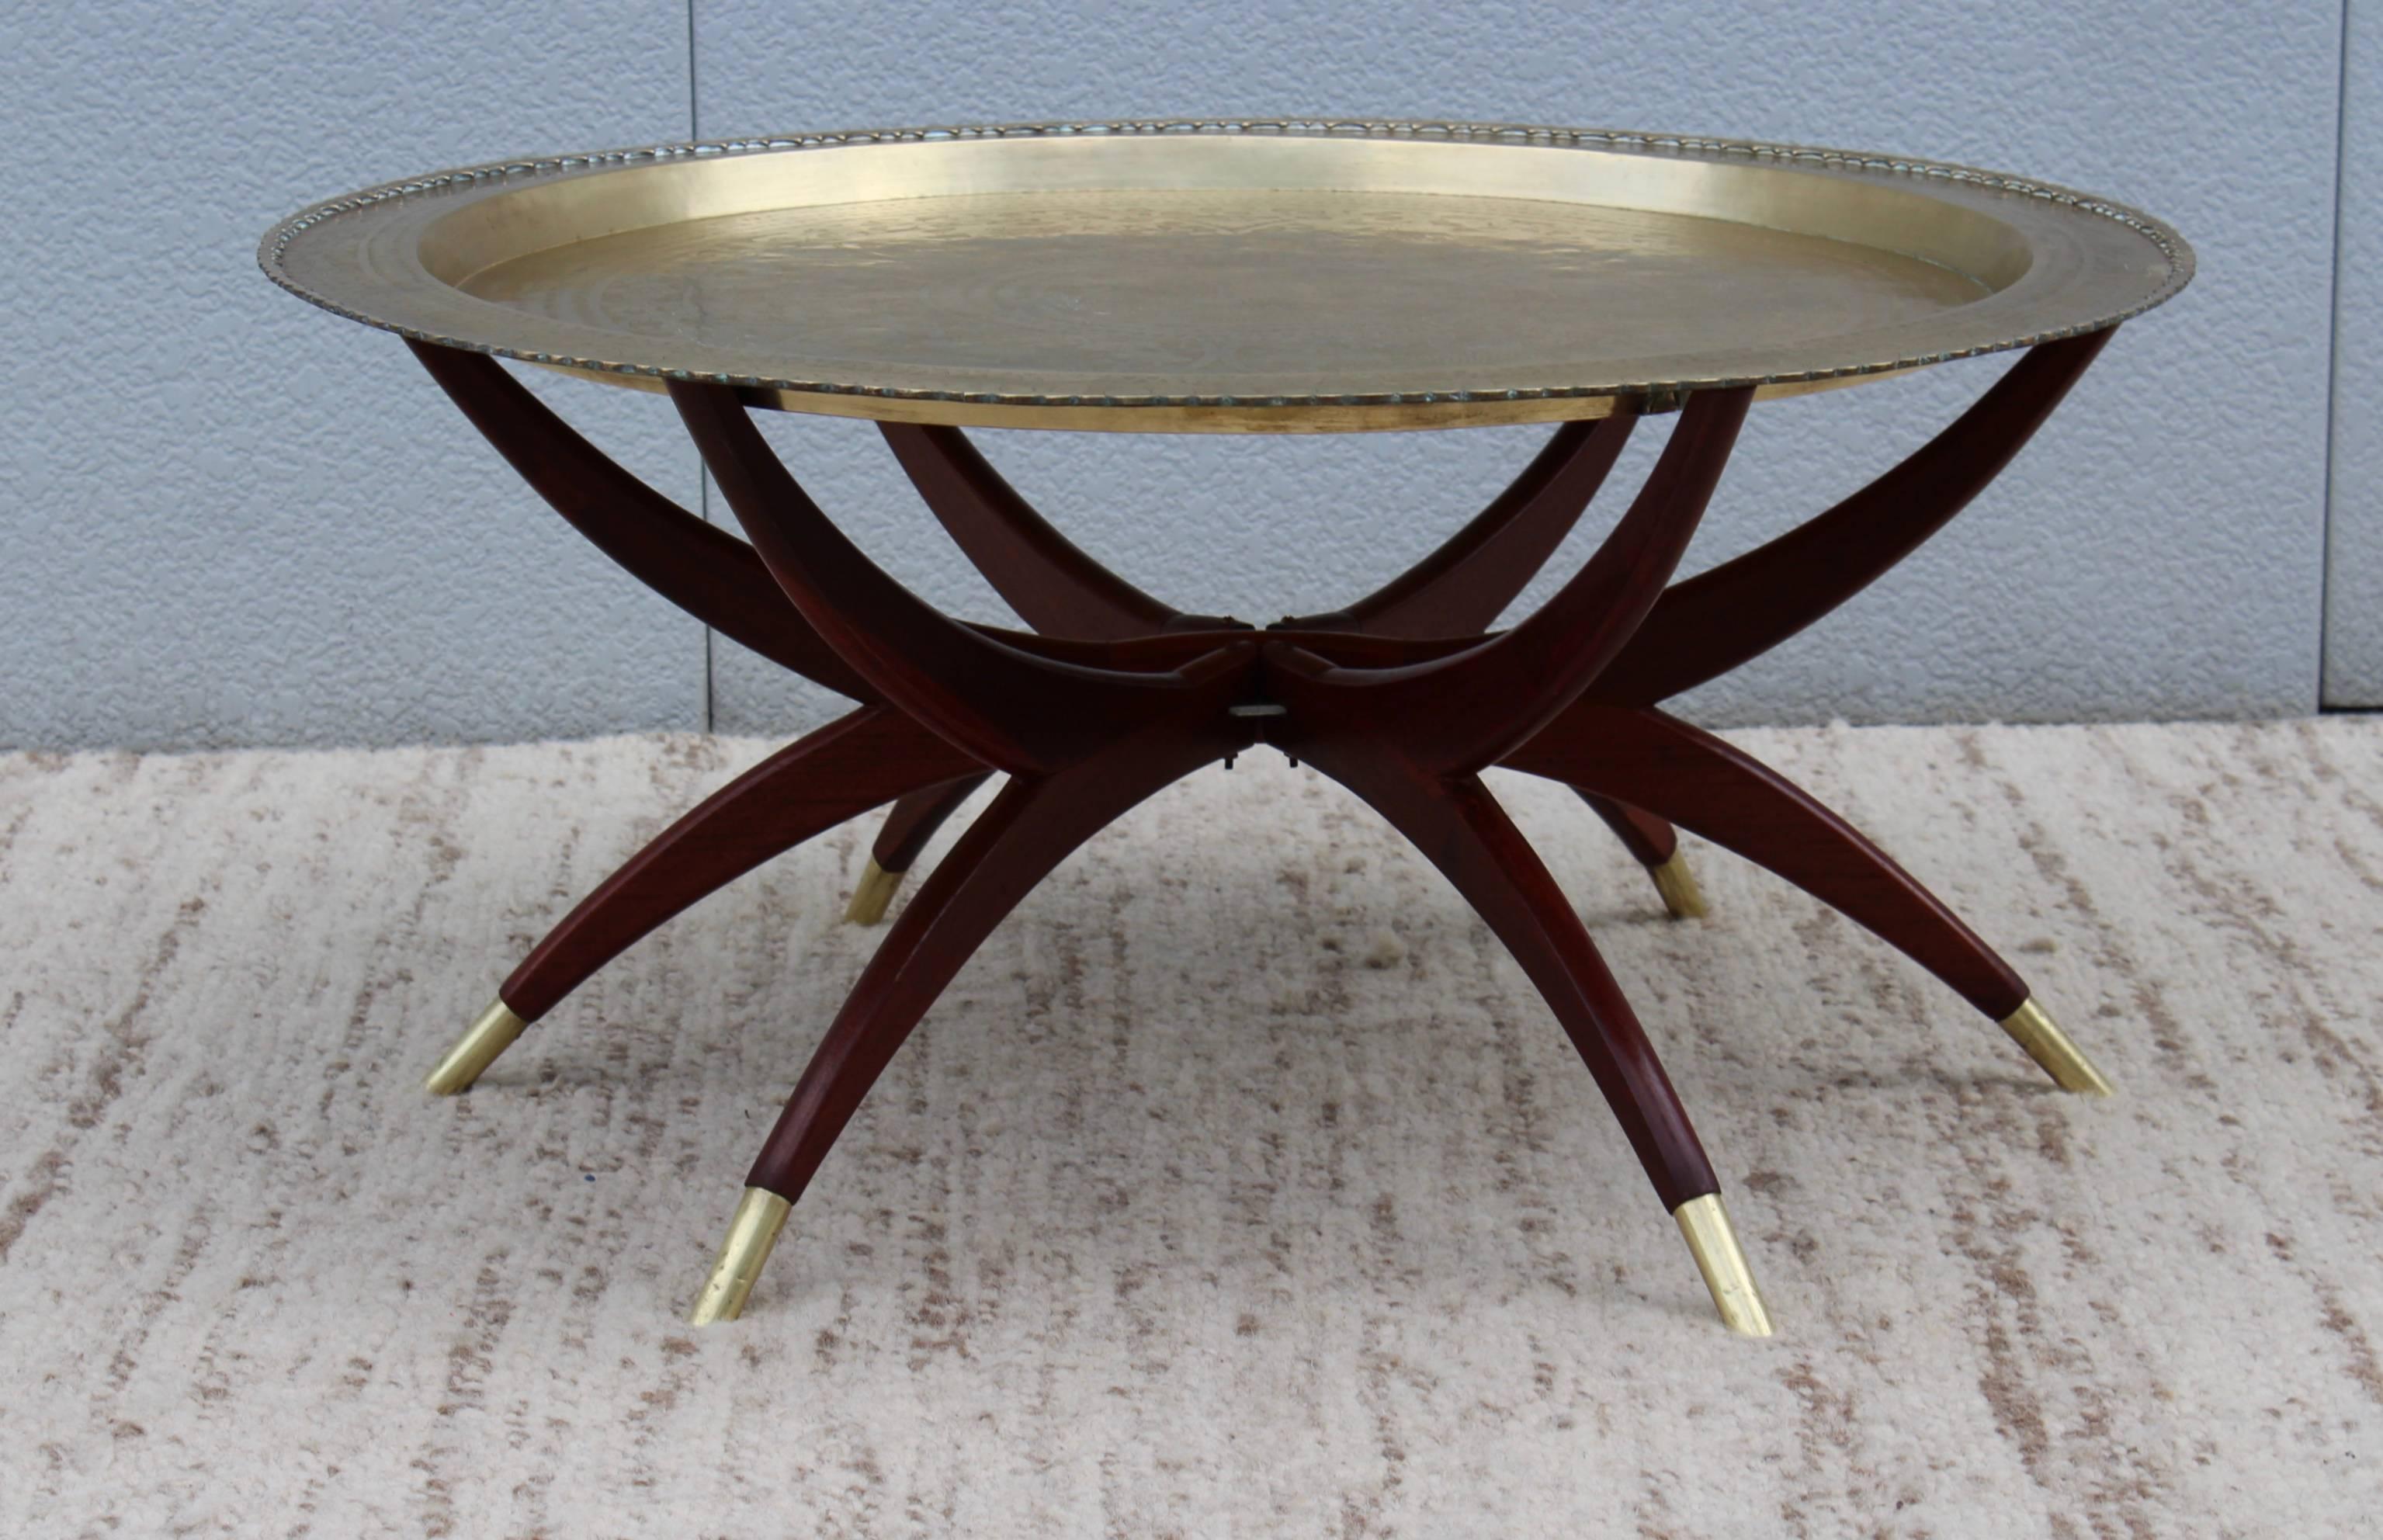 1960s spider base with brass sabots and brass tray top with inlay animals details.